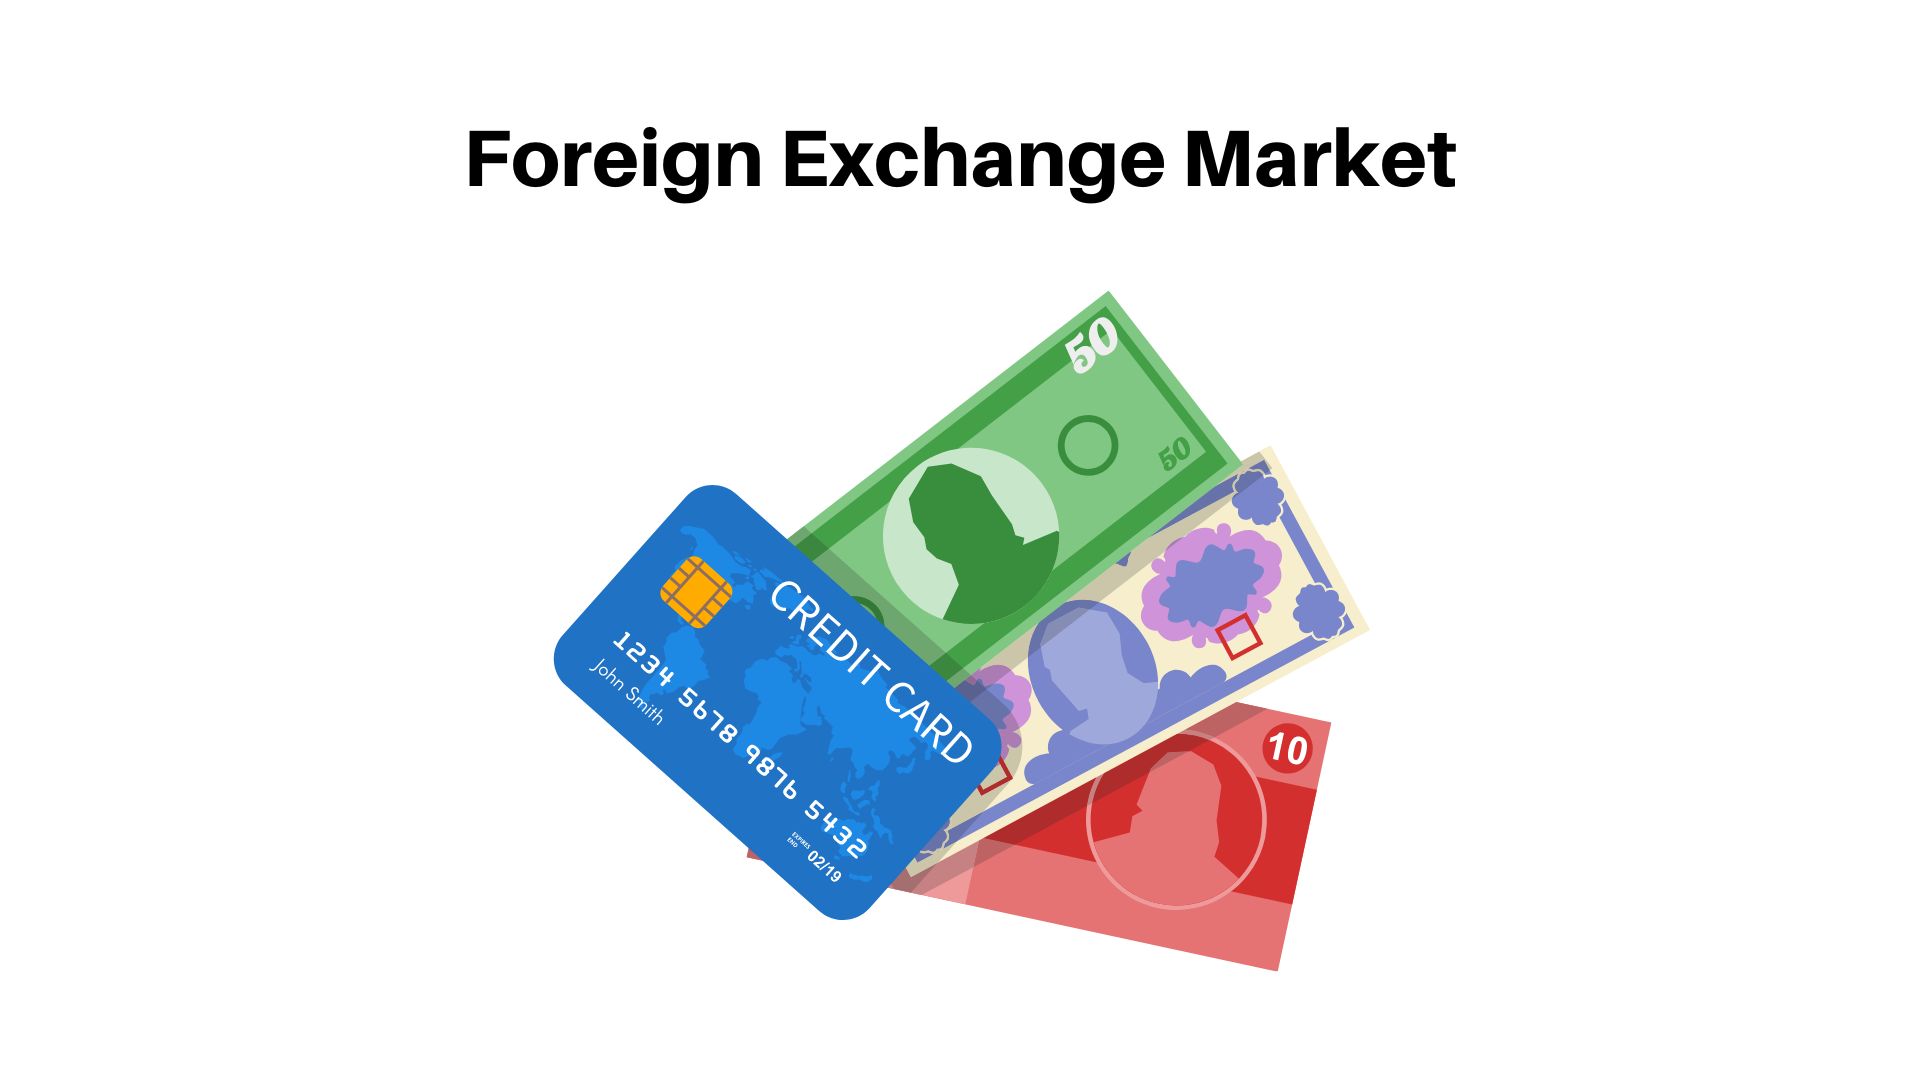 Foreign Exchange Market Size Reached USD 1495.56 Billion by 2032